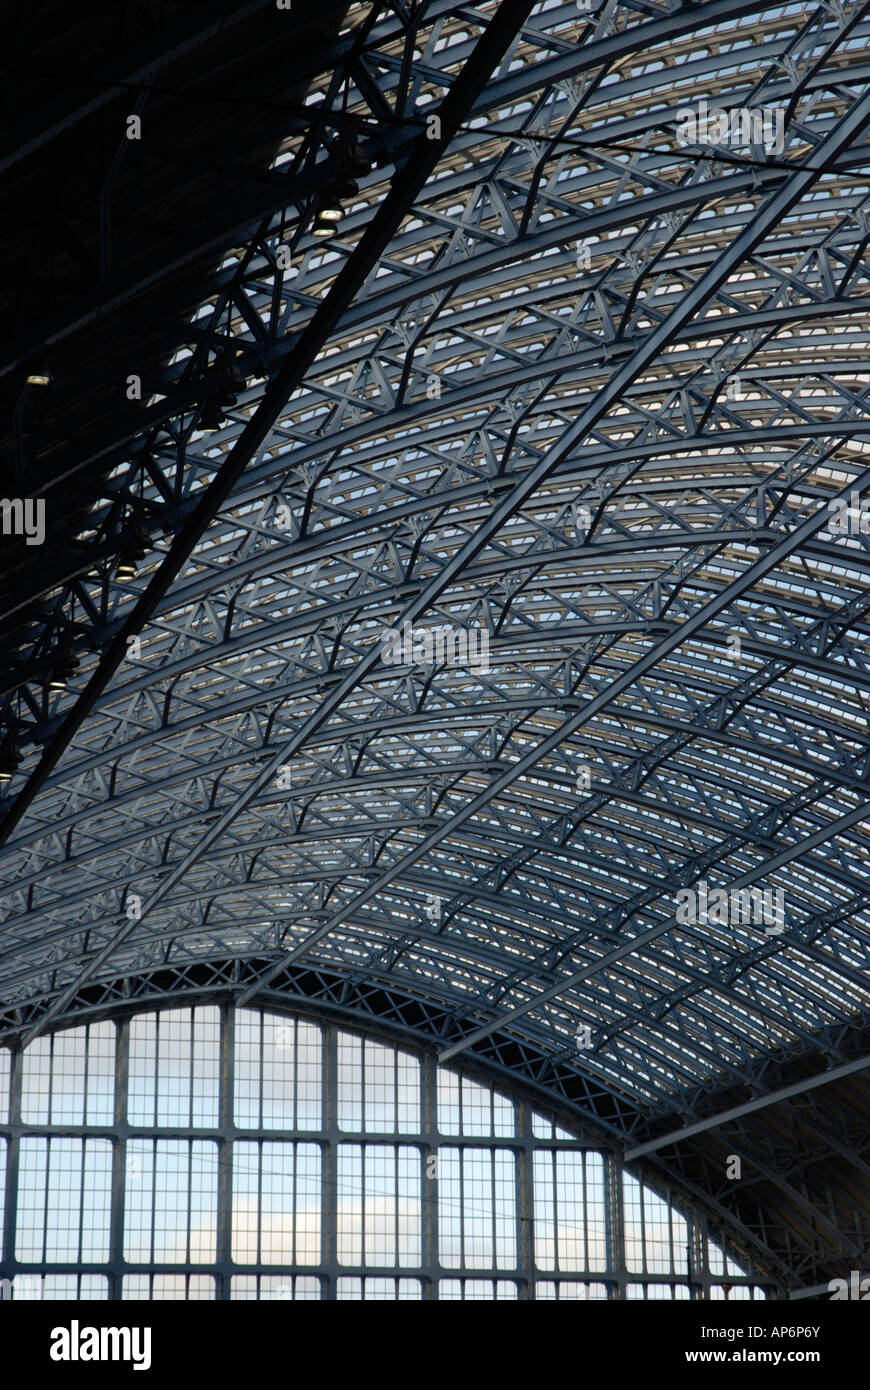 Interior of St Pancras International railway station showing roof Stock Photo